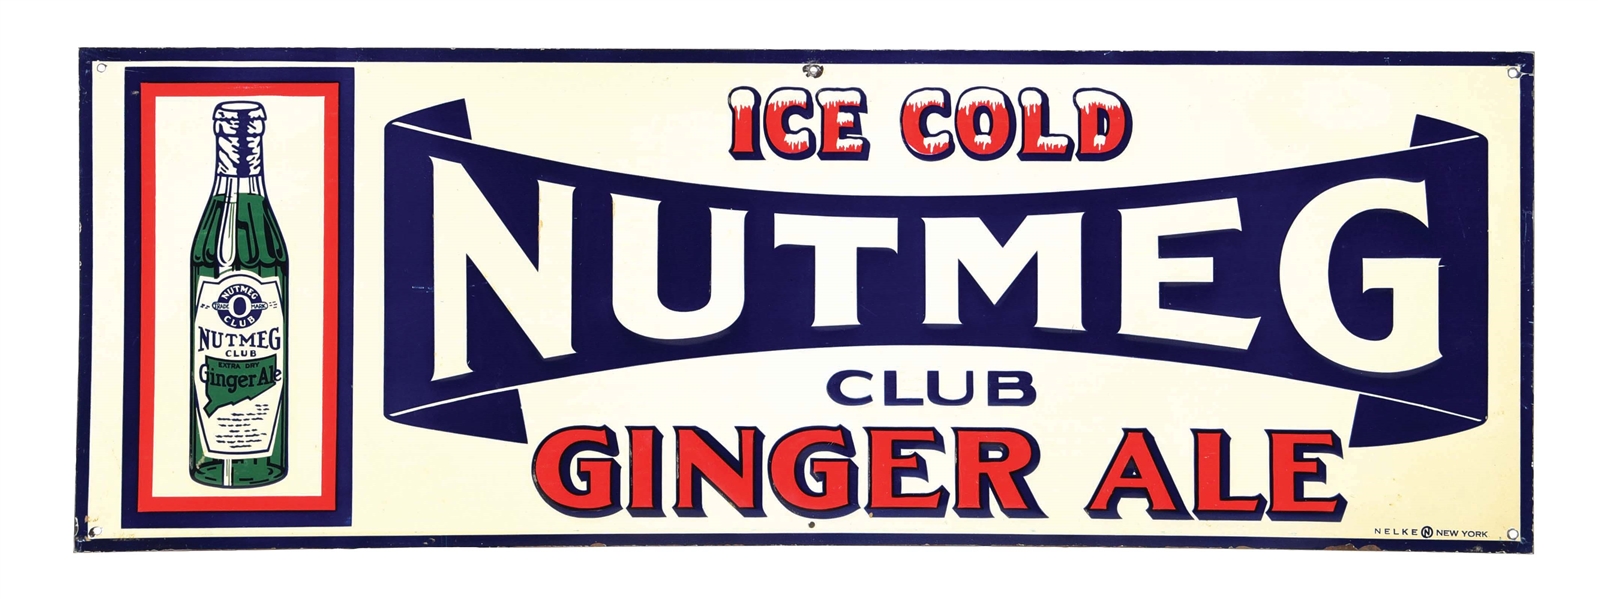 NUTMEG CLUB GINGER ALE EMBOSSED TIN SIGN W/ BOTTLE GRAPHIC.